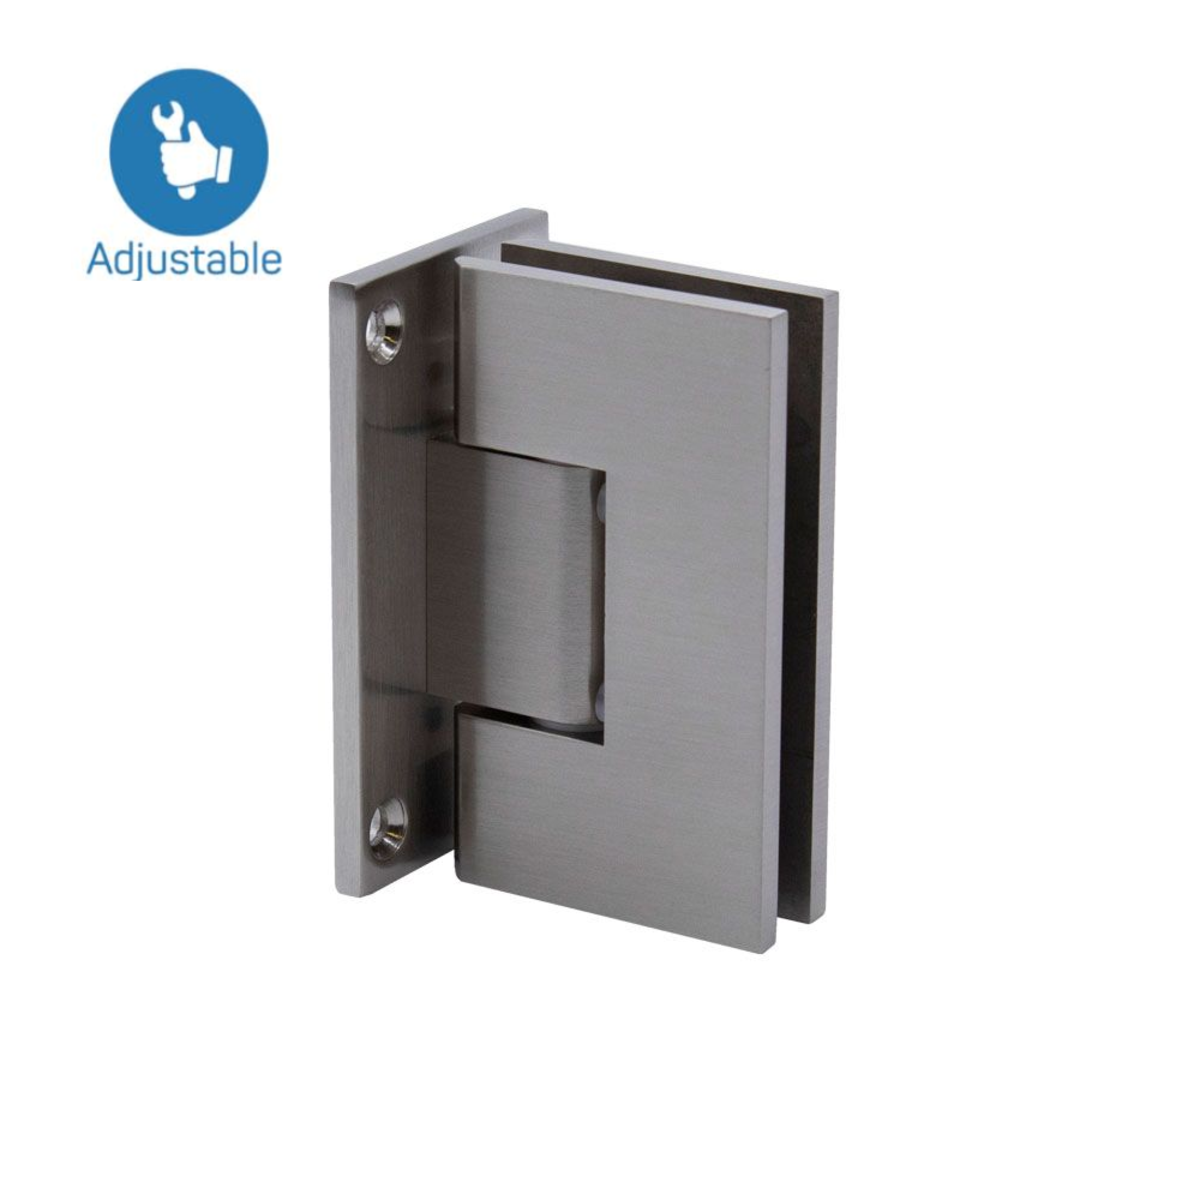 Wall to Glass Full Back Plate Adjustable Hinge